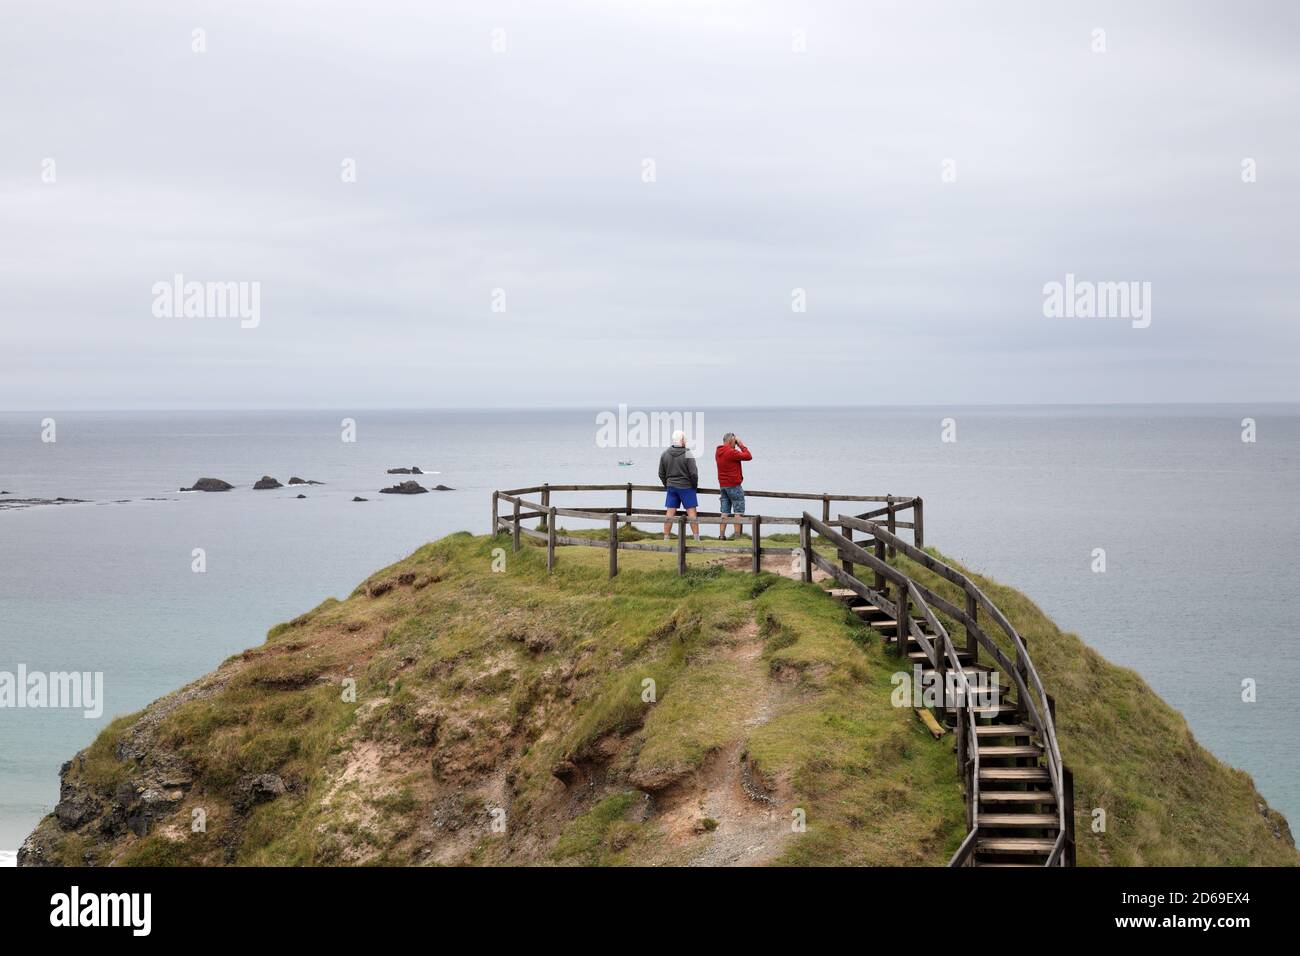 Two People Wildlife Watching From the Viewpoint at Sango Bay, Durness, Scotland, UK Stock Photo